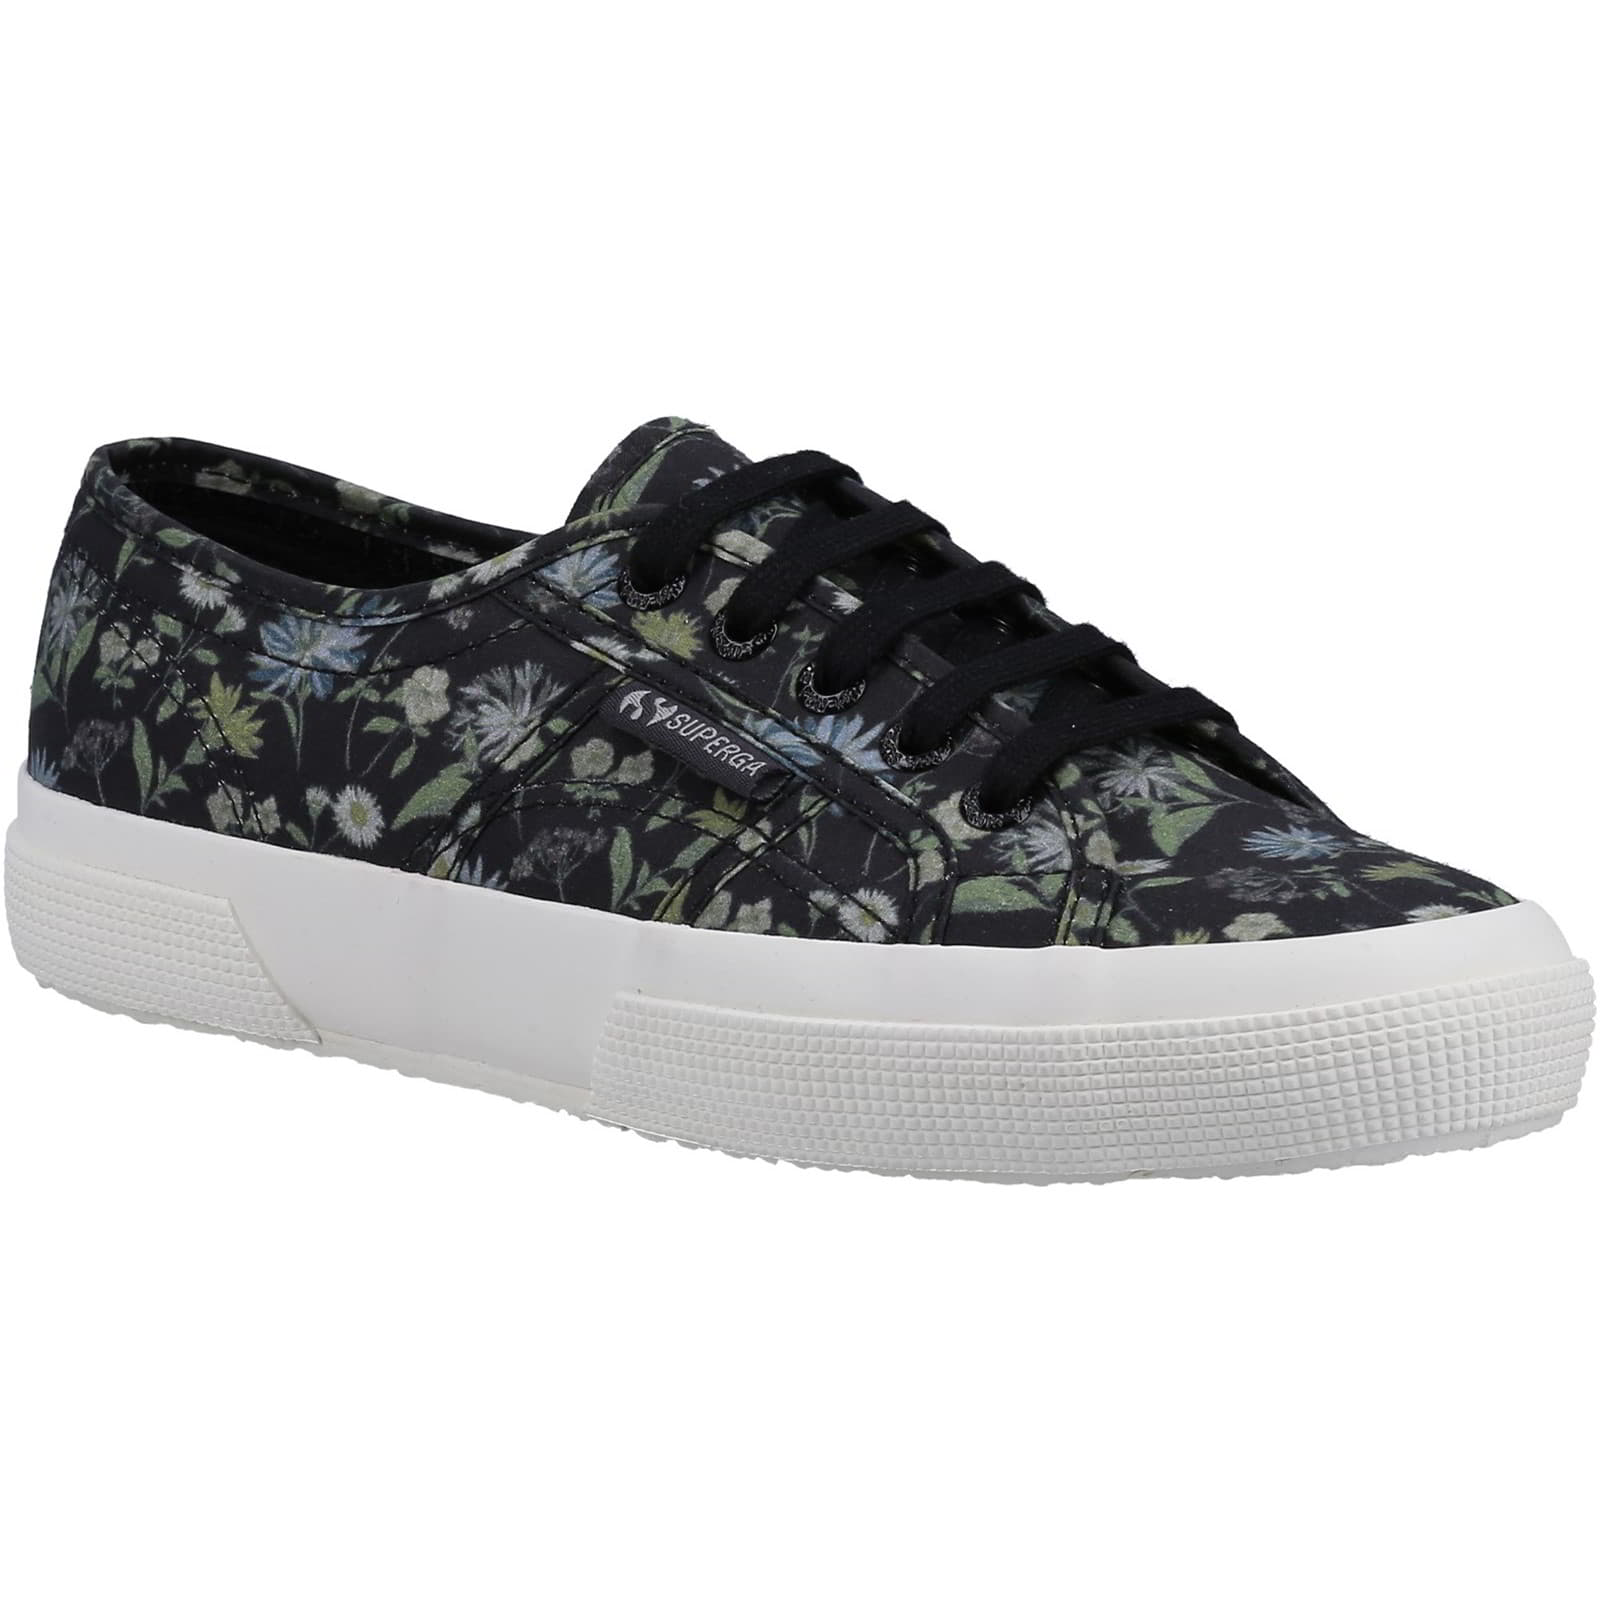 Superga Women's 2750 Floral Print Lace Up Trainers Shoes - UK 7.5